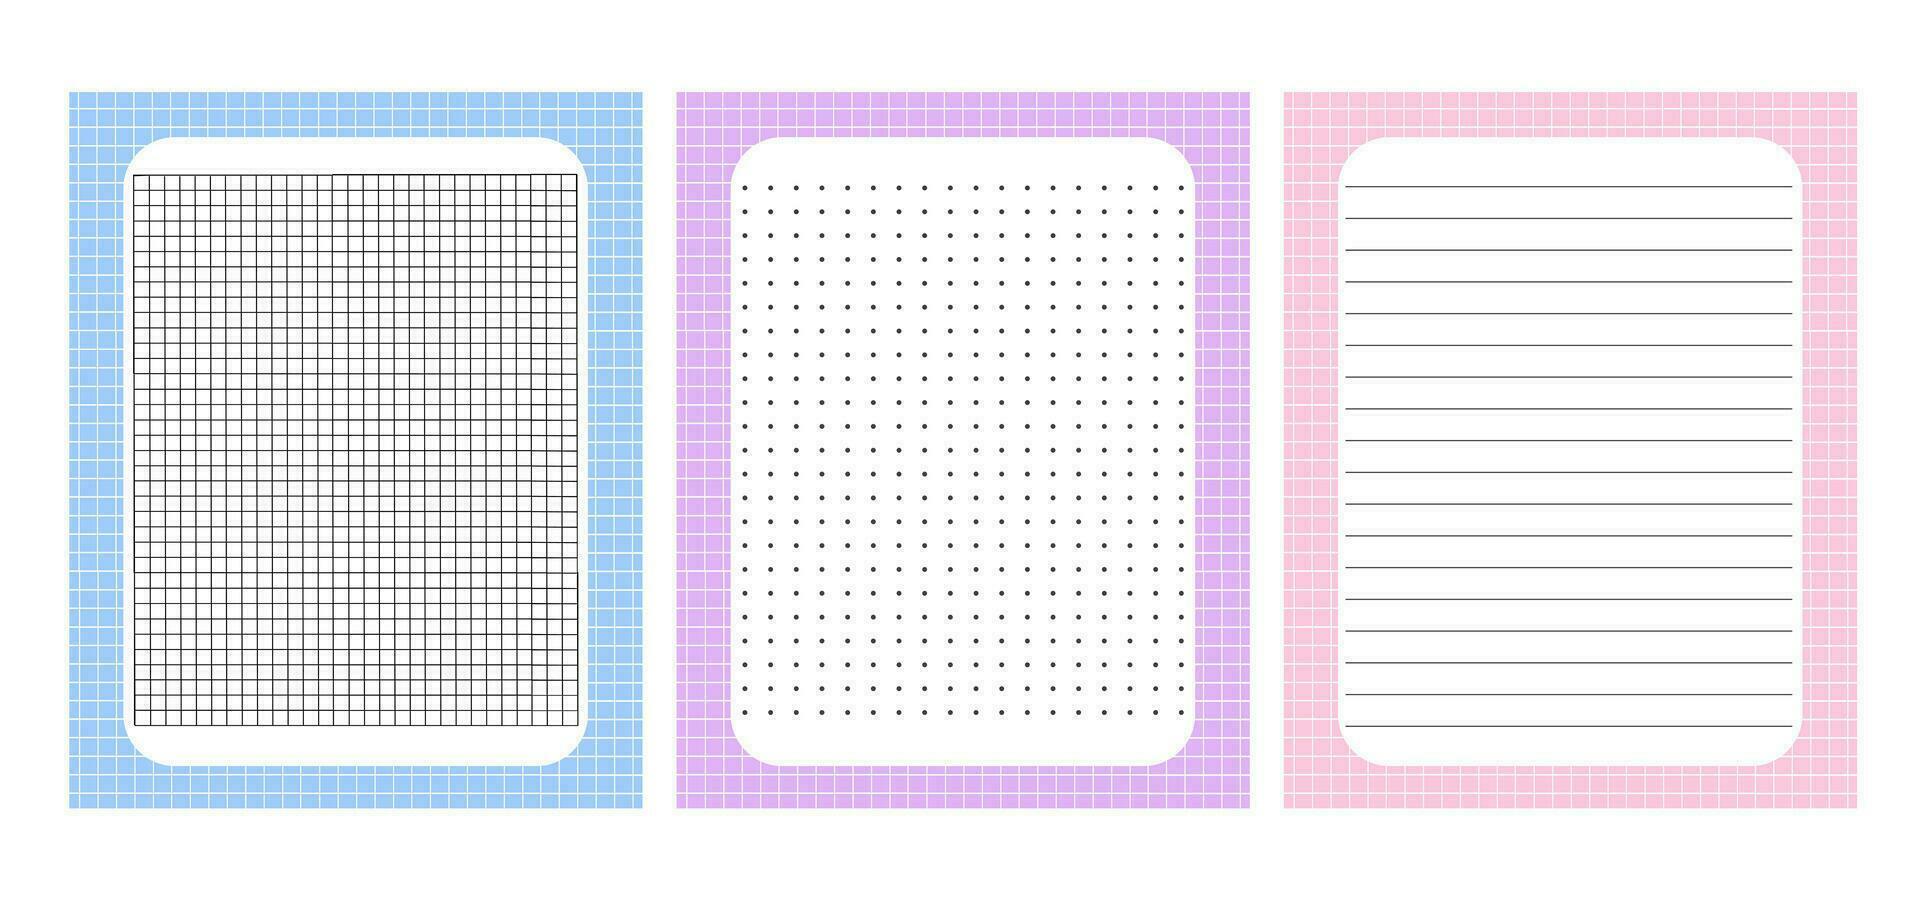 https://static.vecteezy.com/system/resources/previews/027/954/475/non_2x/bullet-journal-blank-printable-page-templates-set-simple-minimalist-checked-blue-pink-violet-frame-illustration-things-to-do-reminder-notes-fill-in-planner-to-organize-any-life-event-vector.jpg